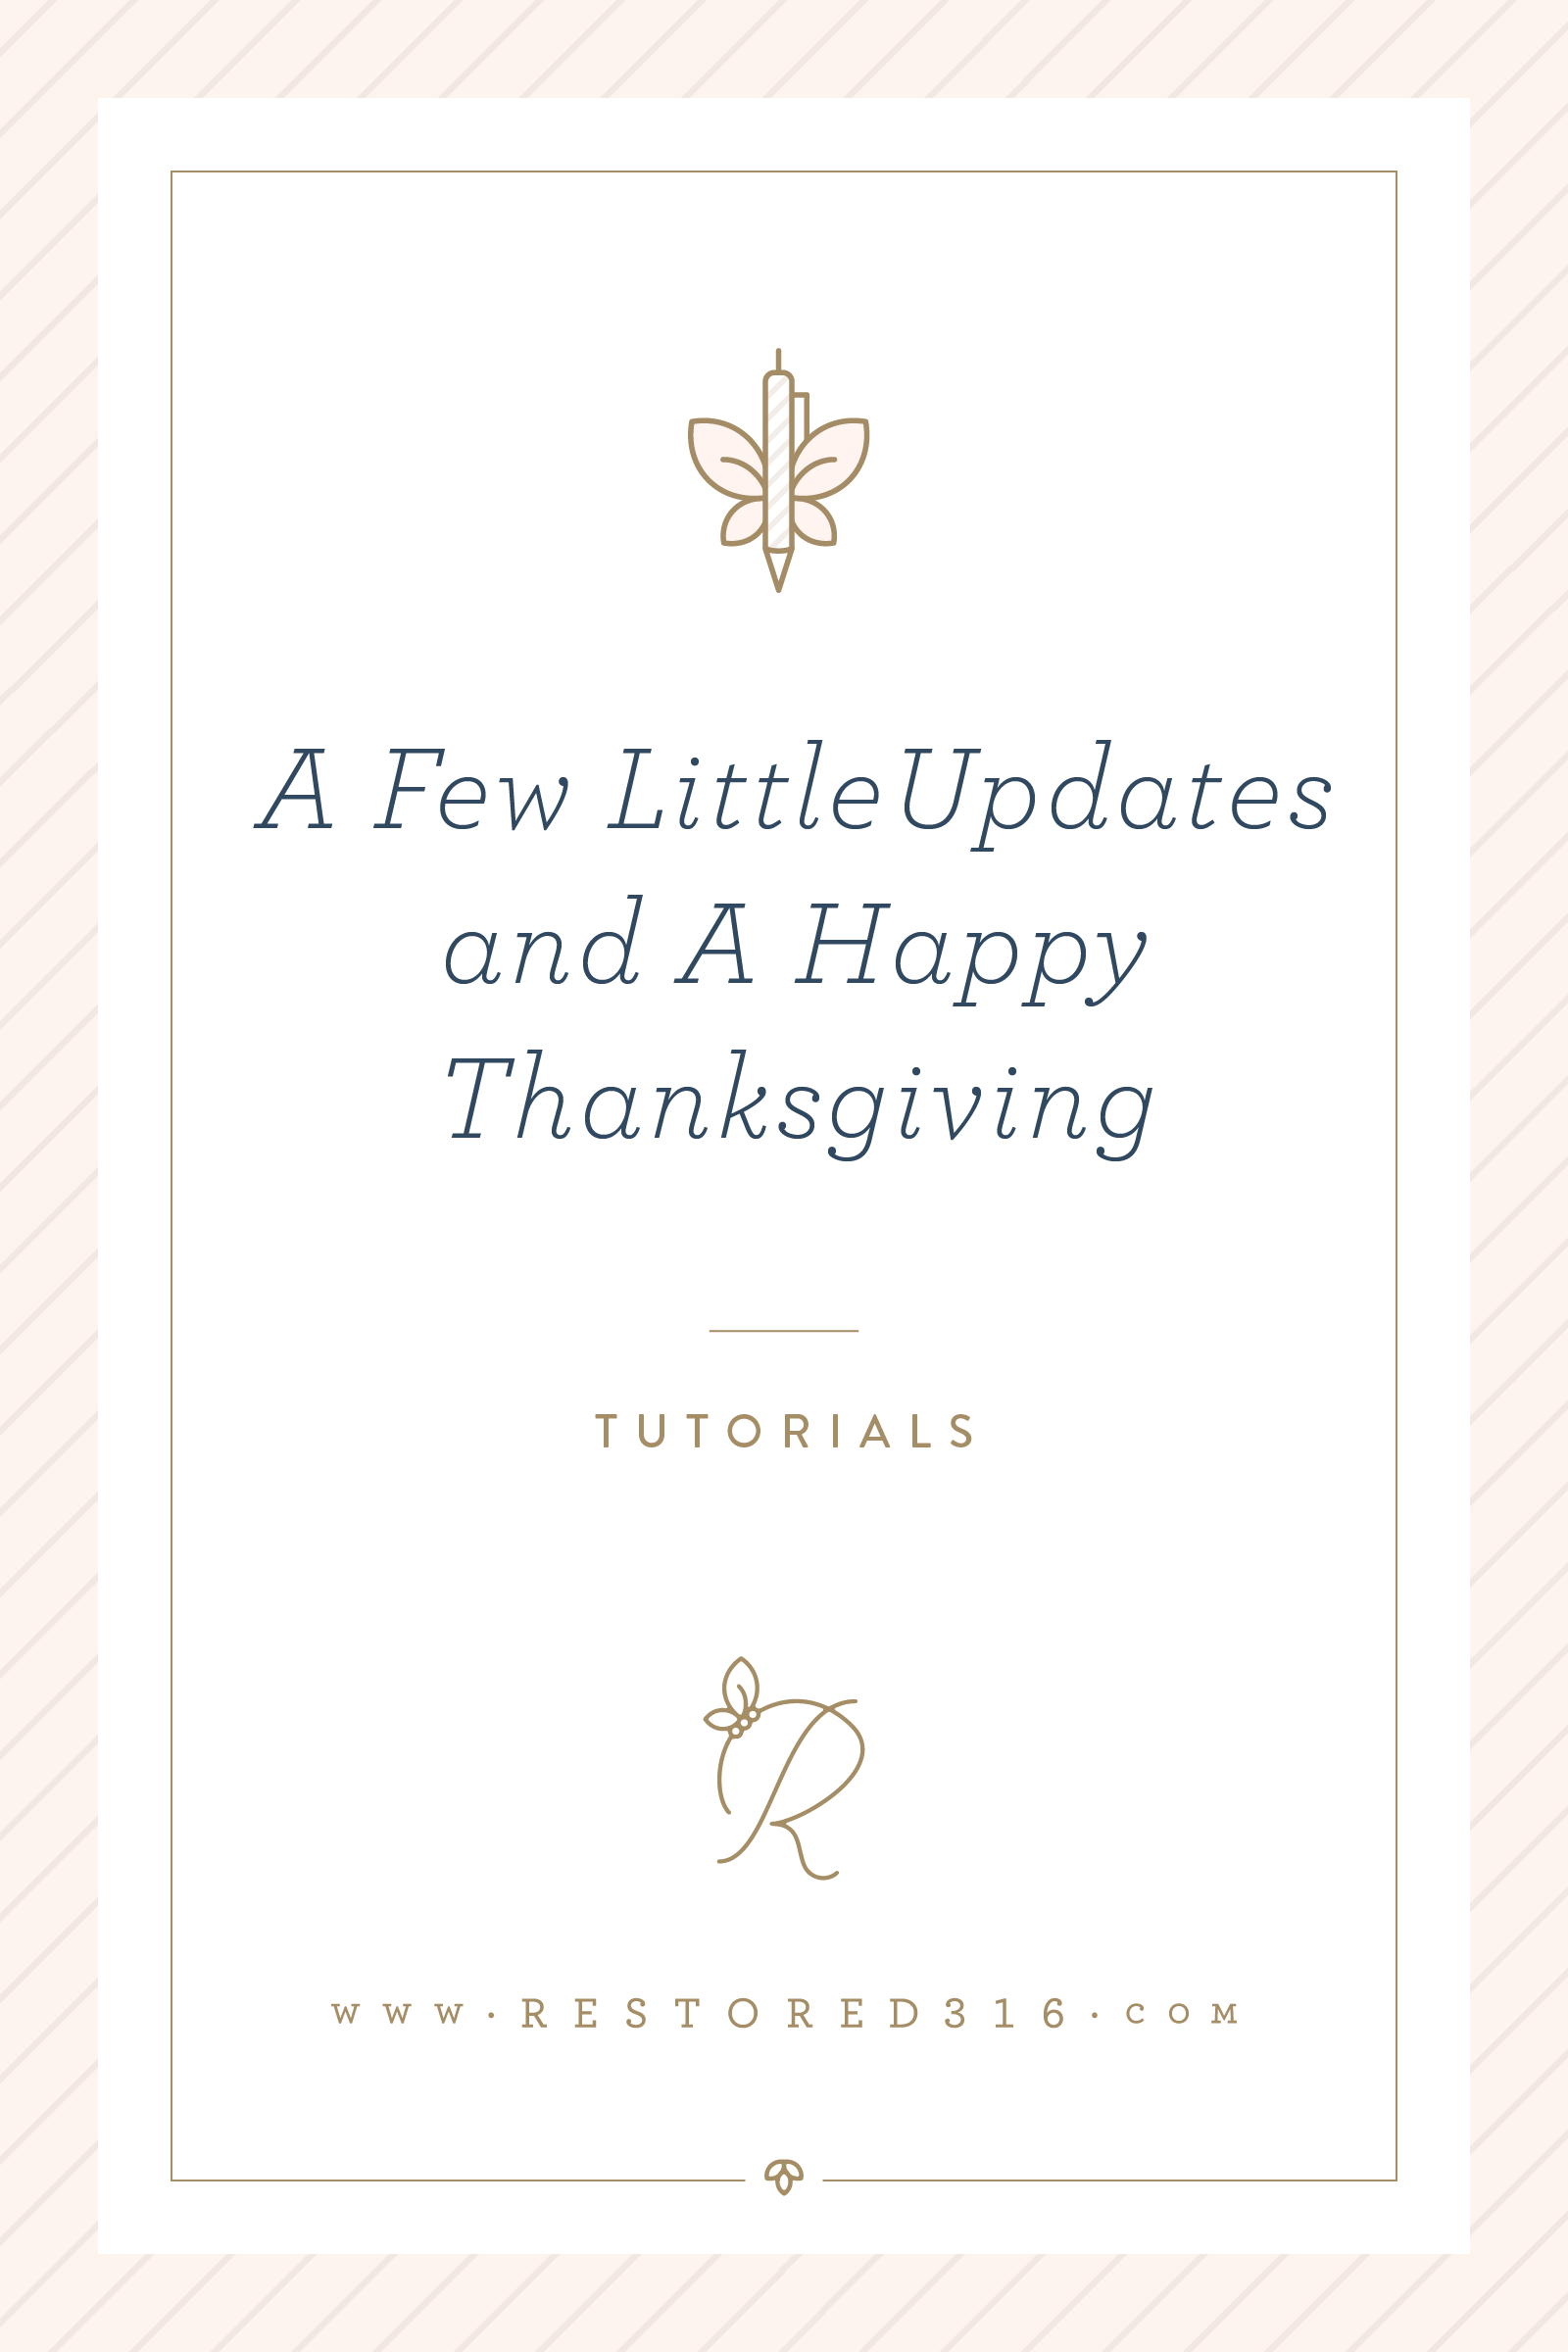 A few little updates and a Happy Thanksgiving